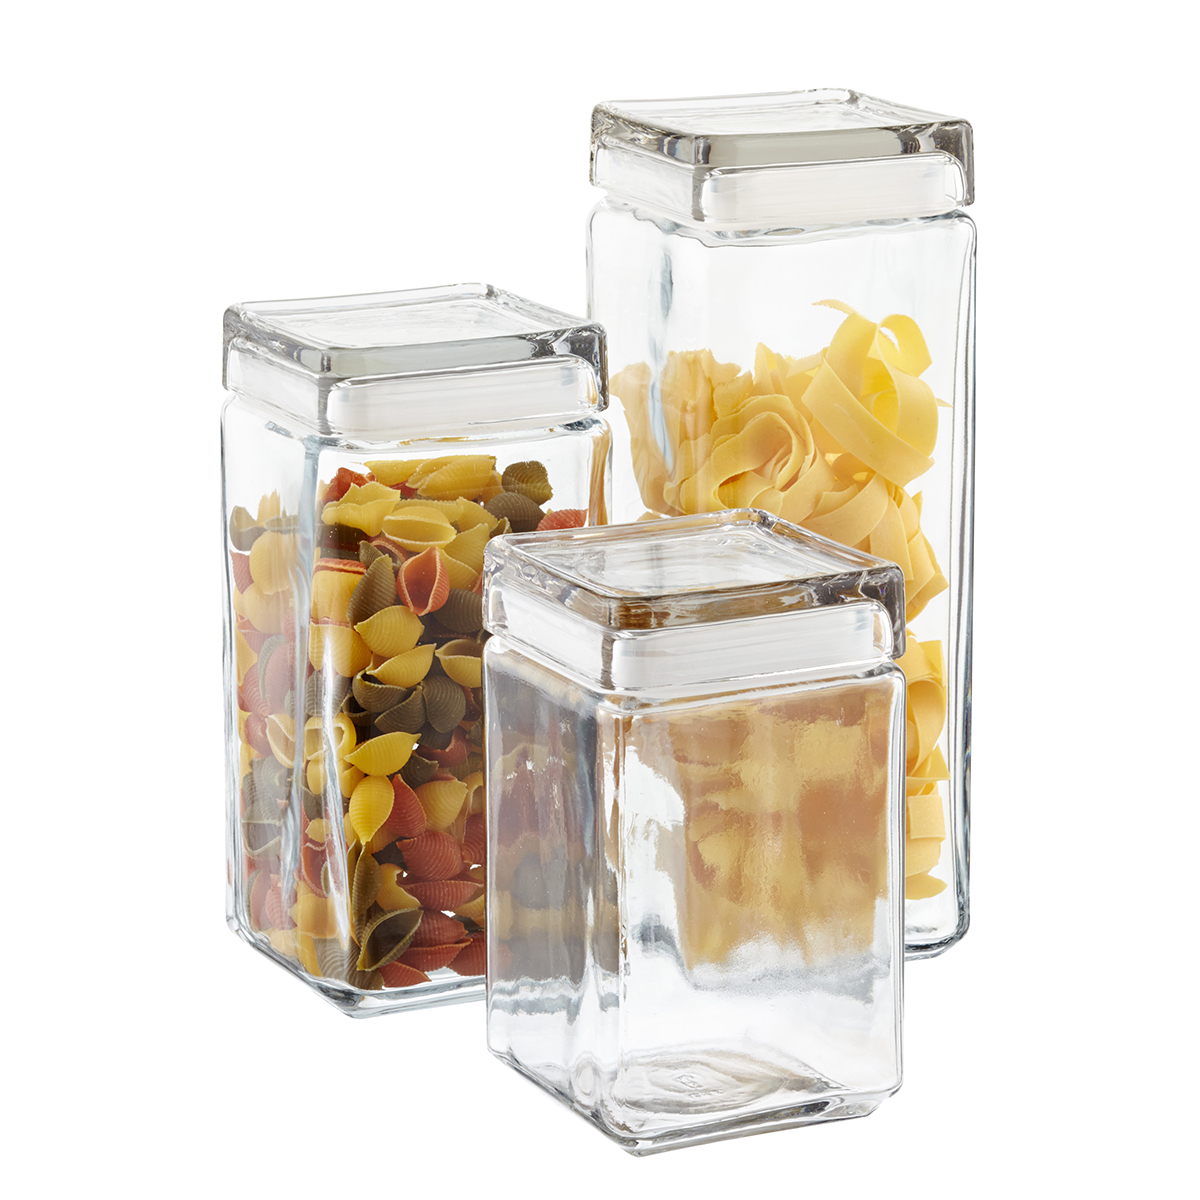 https://www.containerstore.com/catalogimages/310768/10013344gStackableSqCanister.jpg